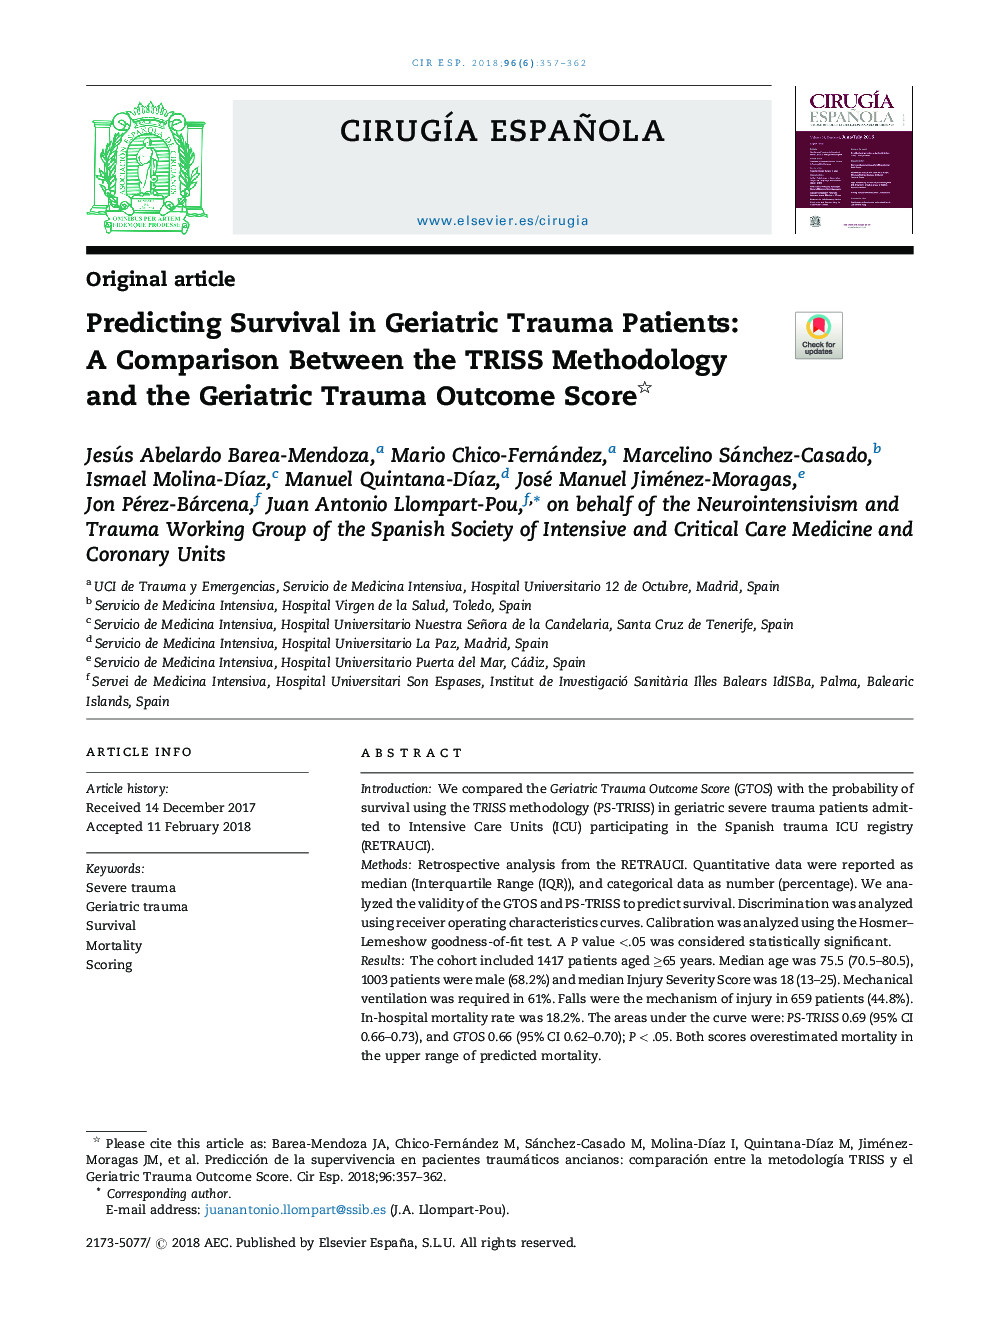 Predicting Survival in Geriatric Trauma Patients: A Comparison Between the TRISS Methodology and the Geriatric Trauma Outcome Score